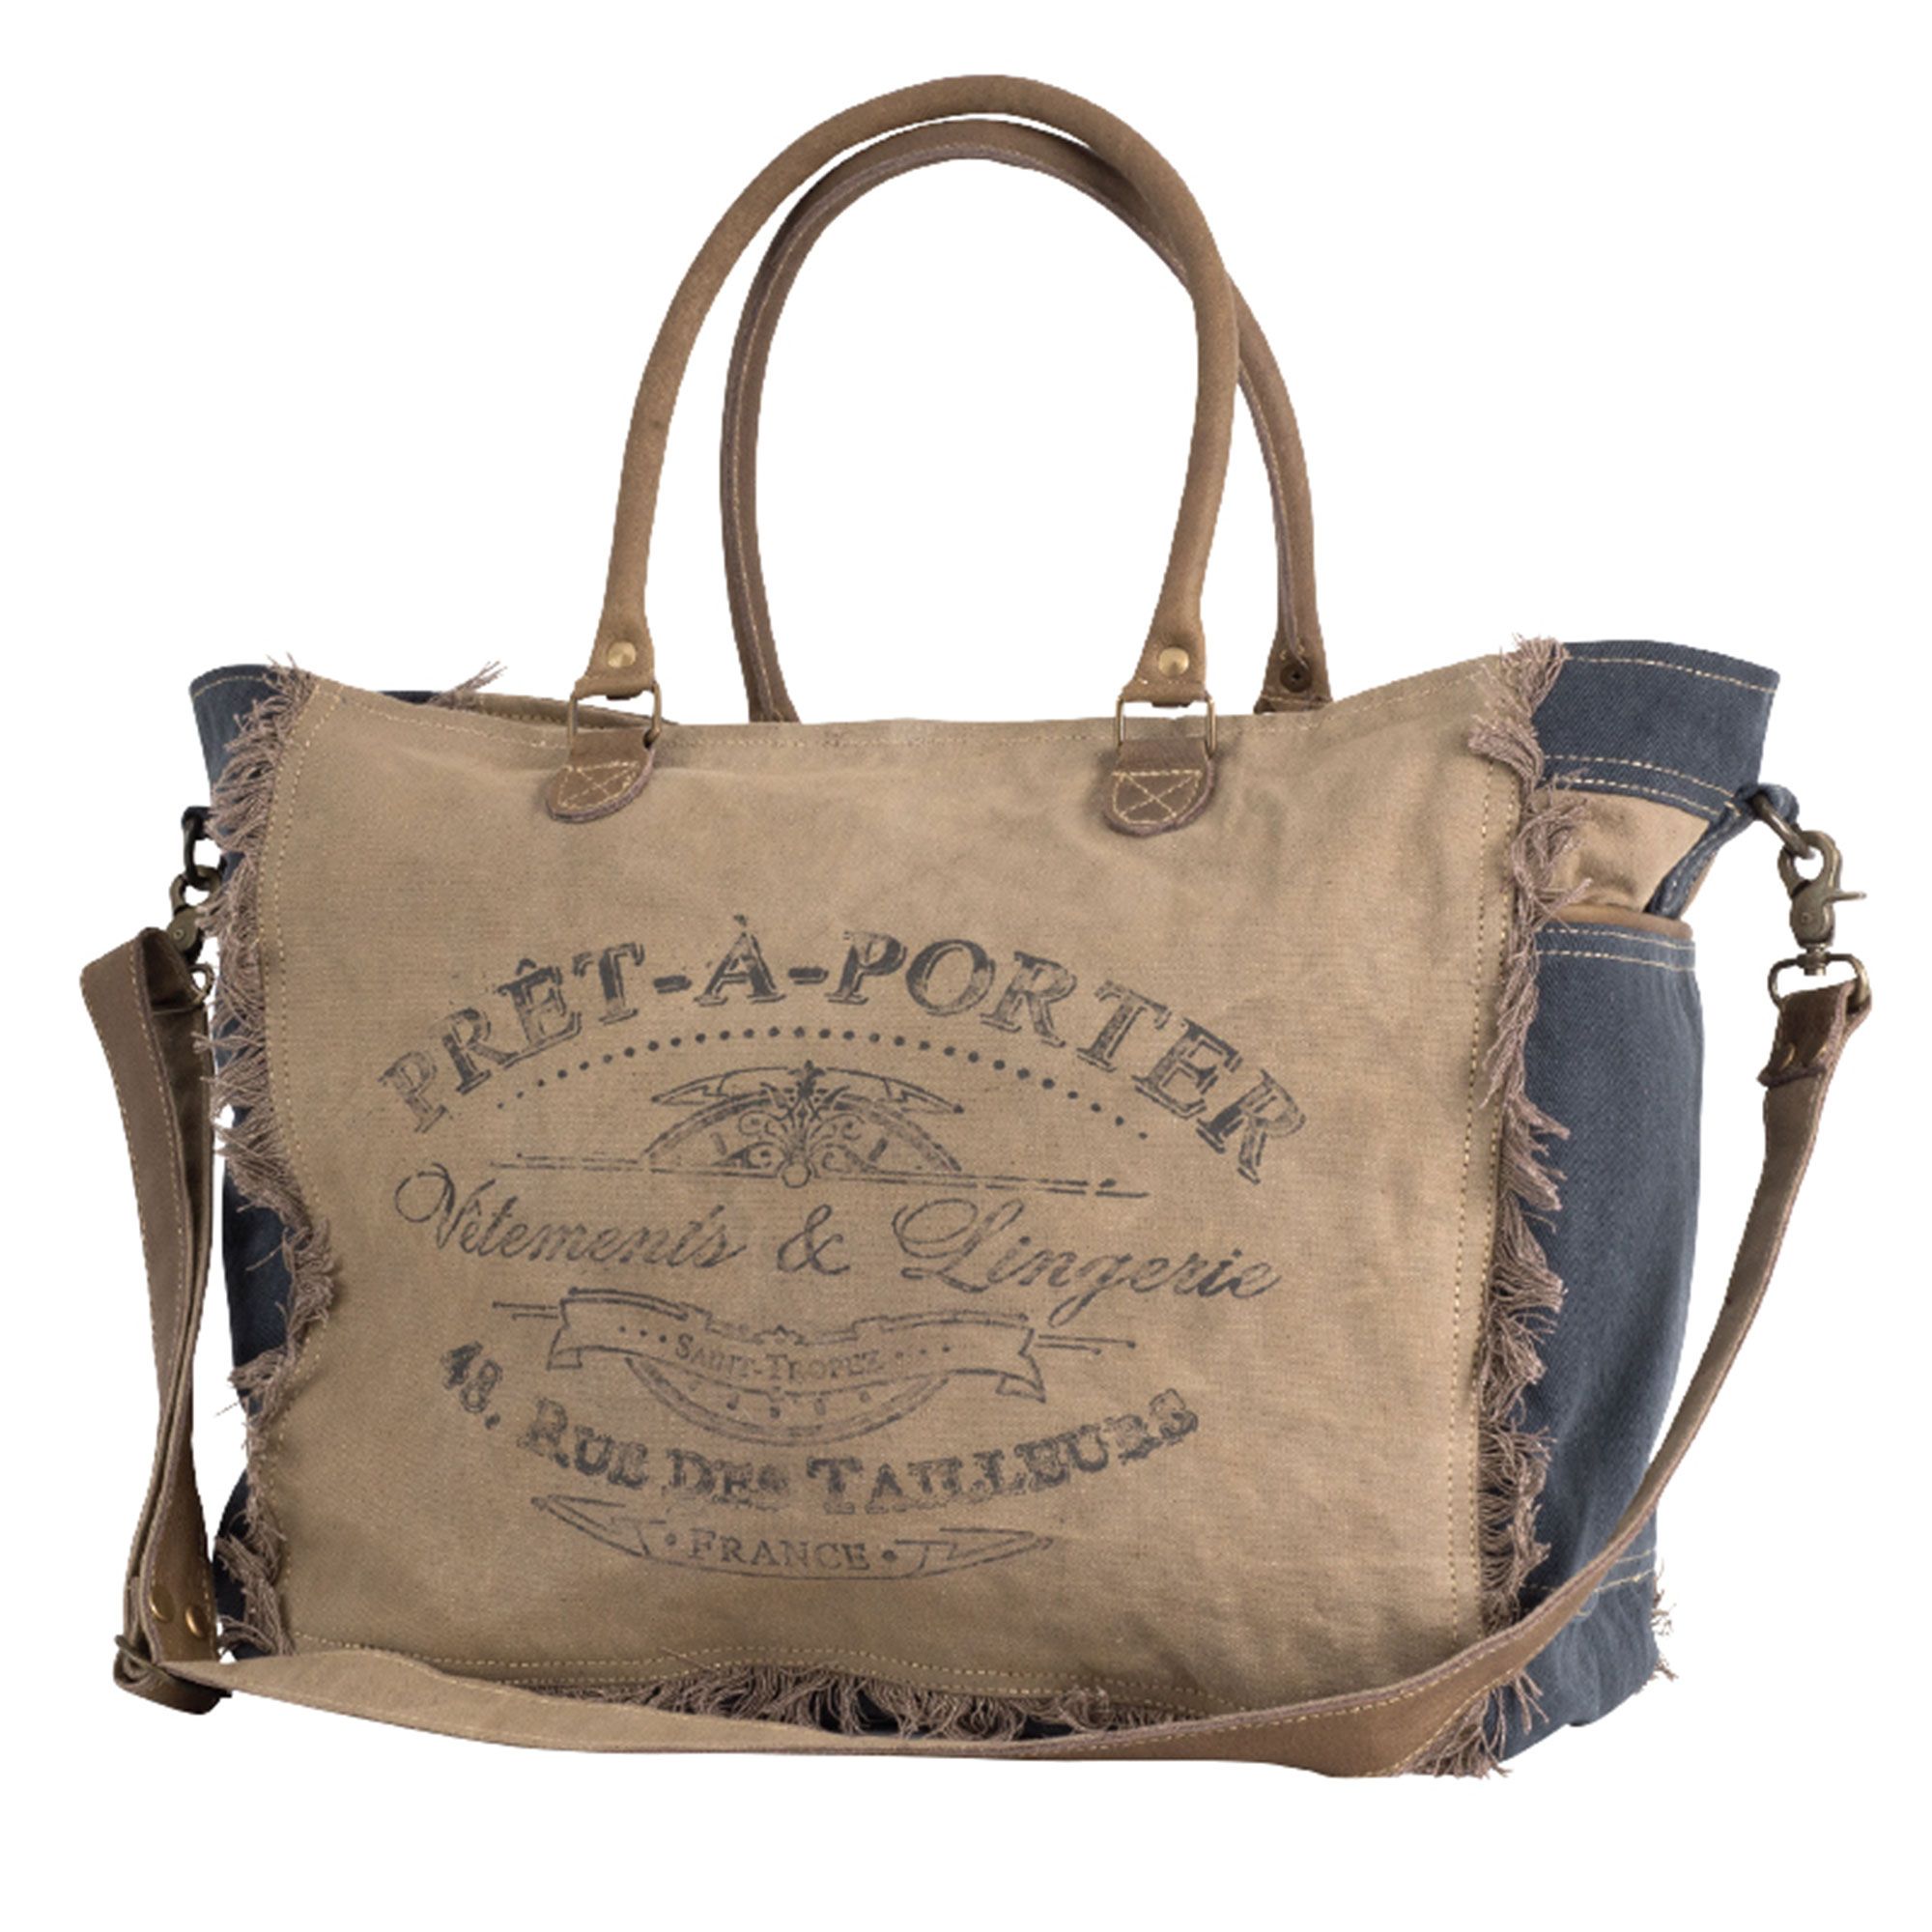 French Pret-A-Porter Ready To Wear Canvas Duffel Bag by Clea Ray